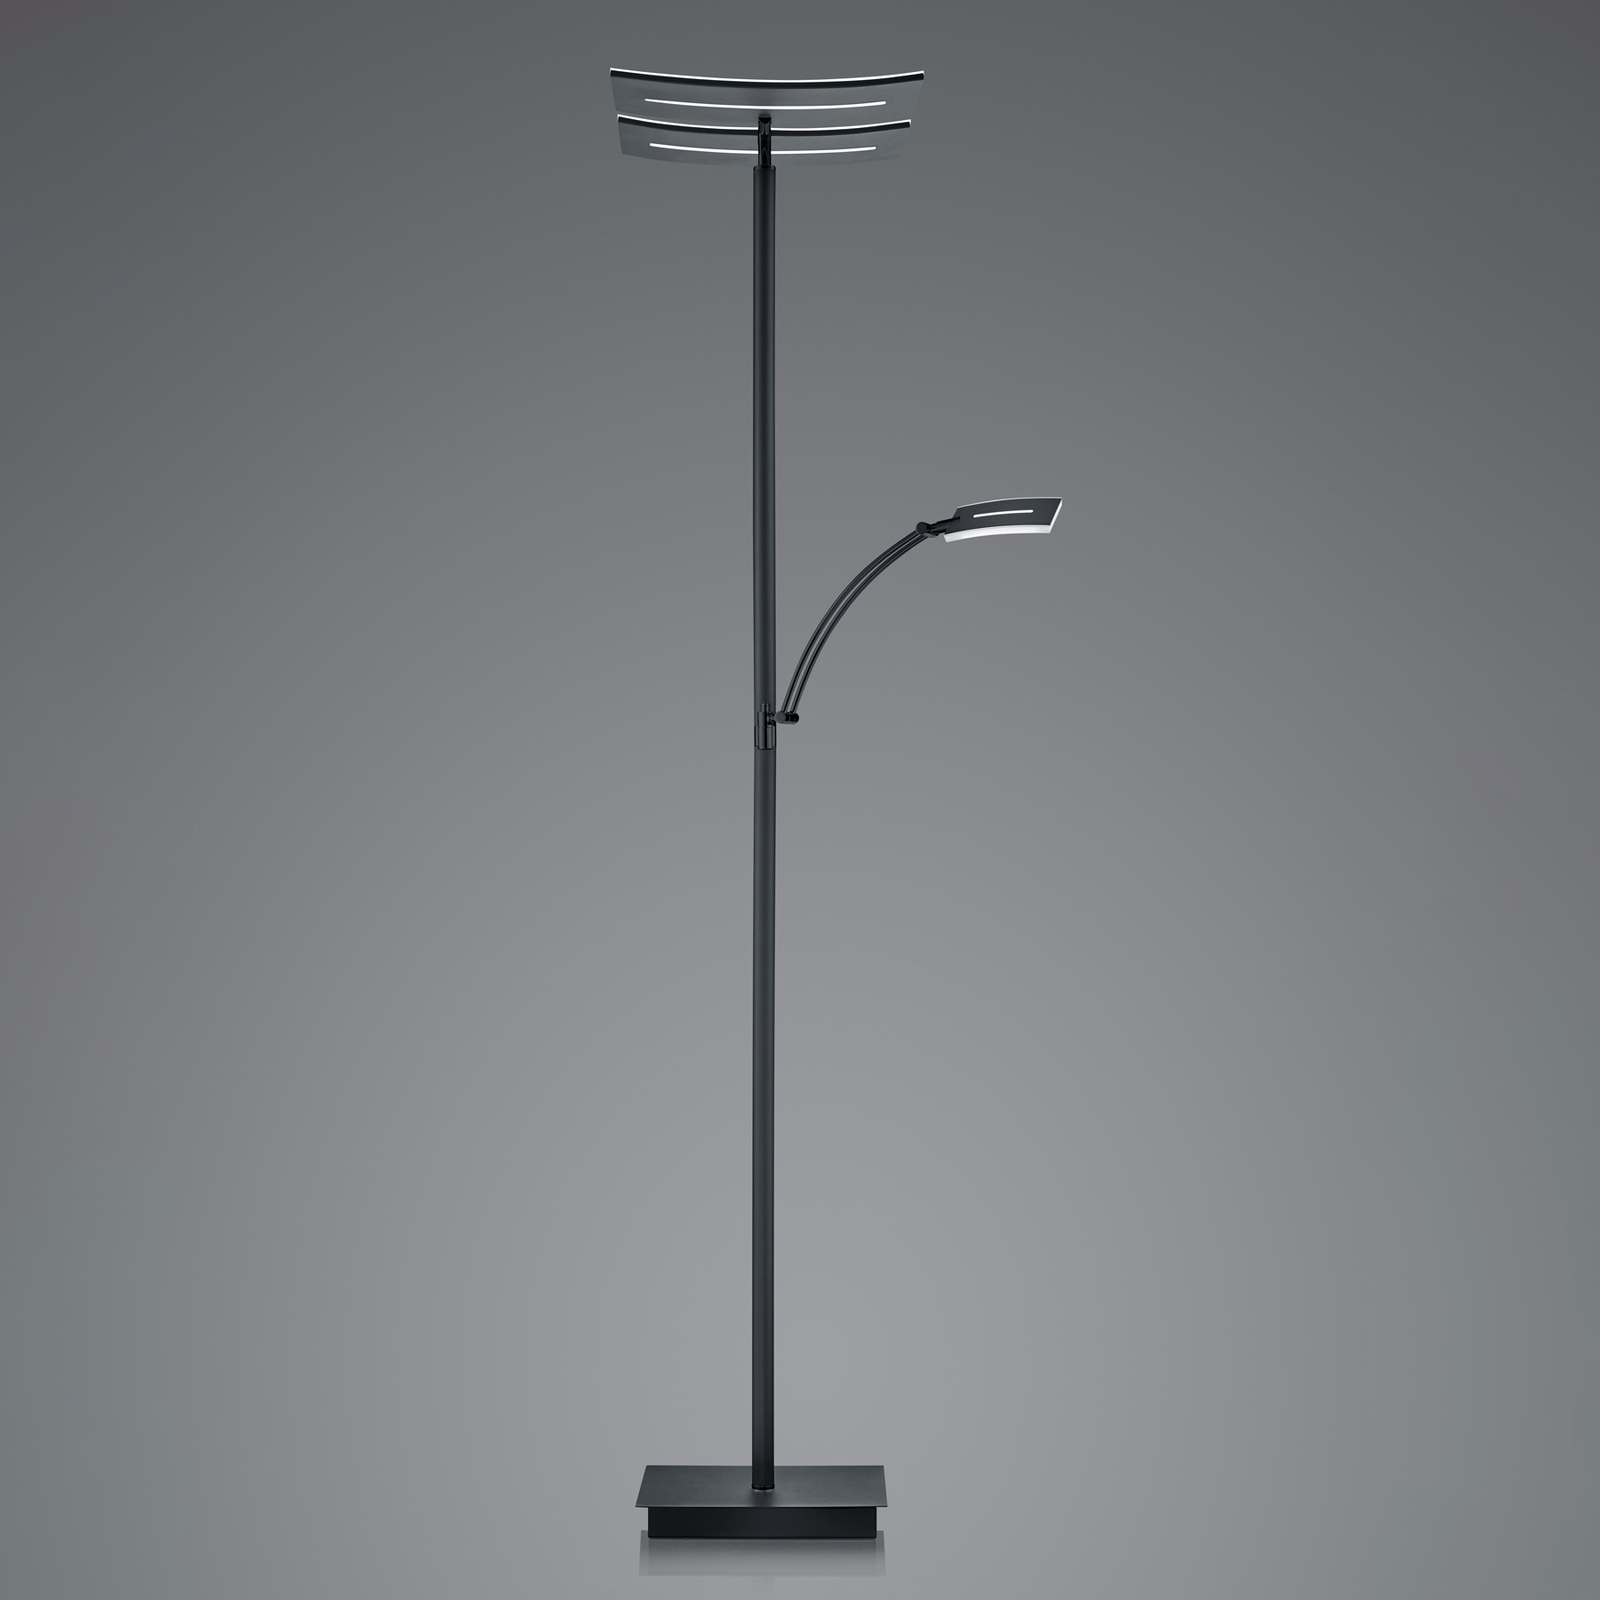 Dual LED floor lamp with a reading light, black